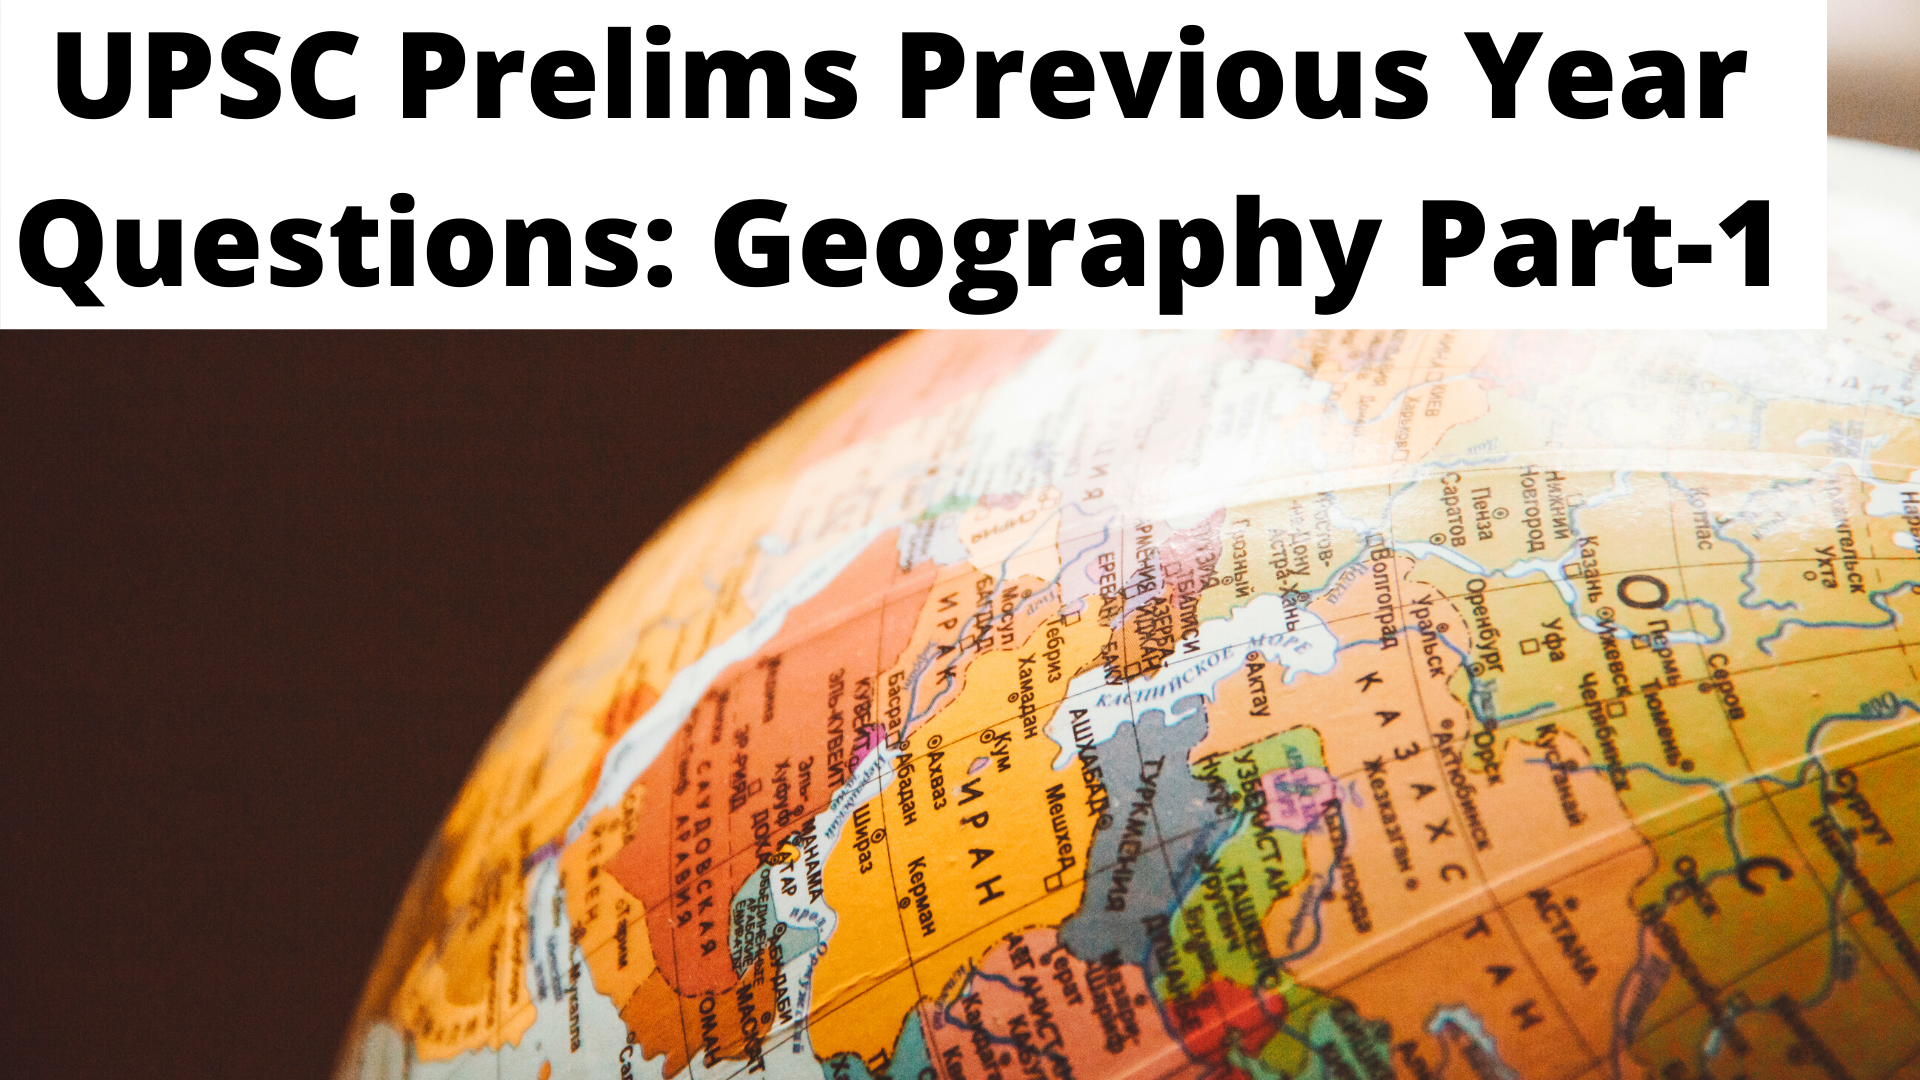 You are currently viewing UPSC Prelims Previous Year Questions: Geography Part-1